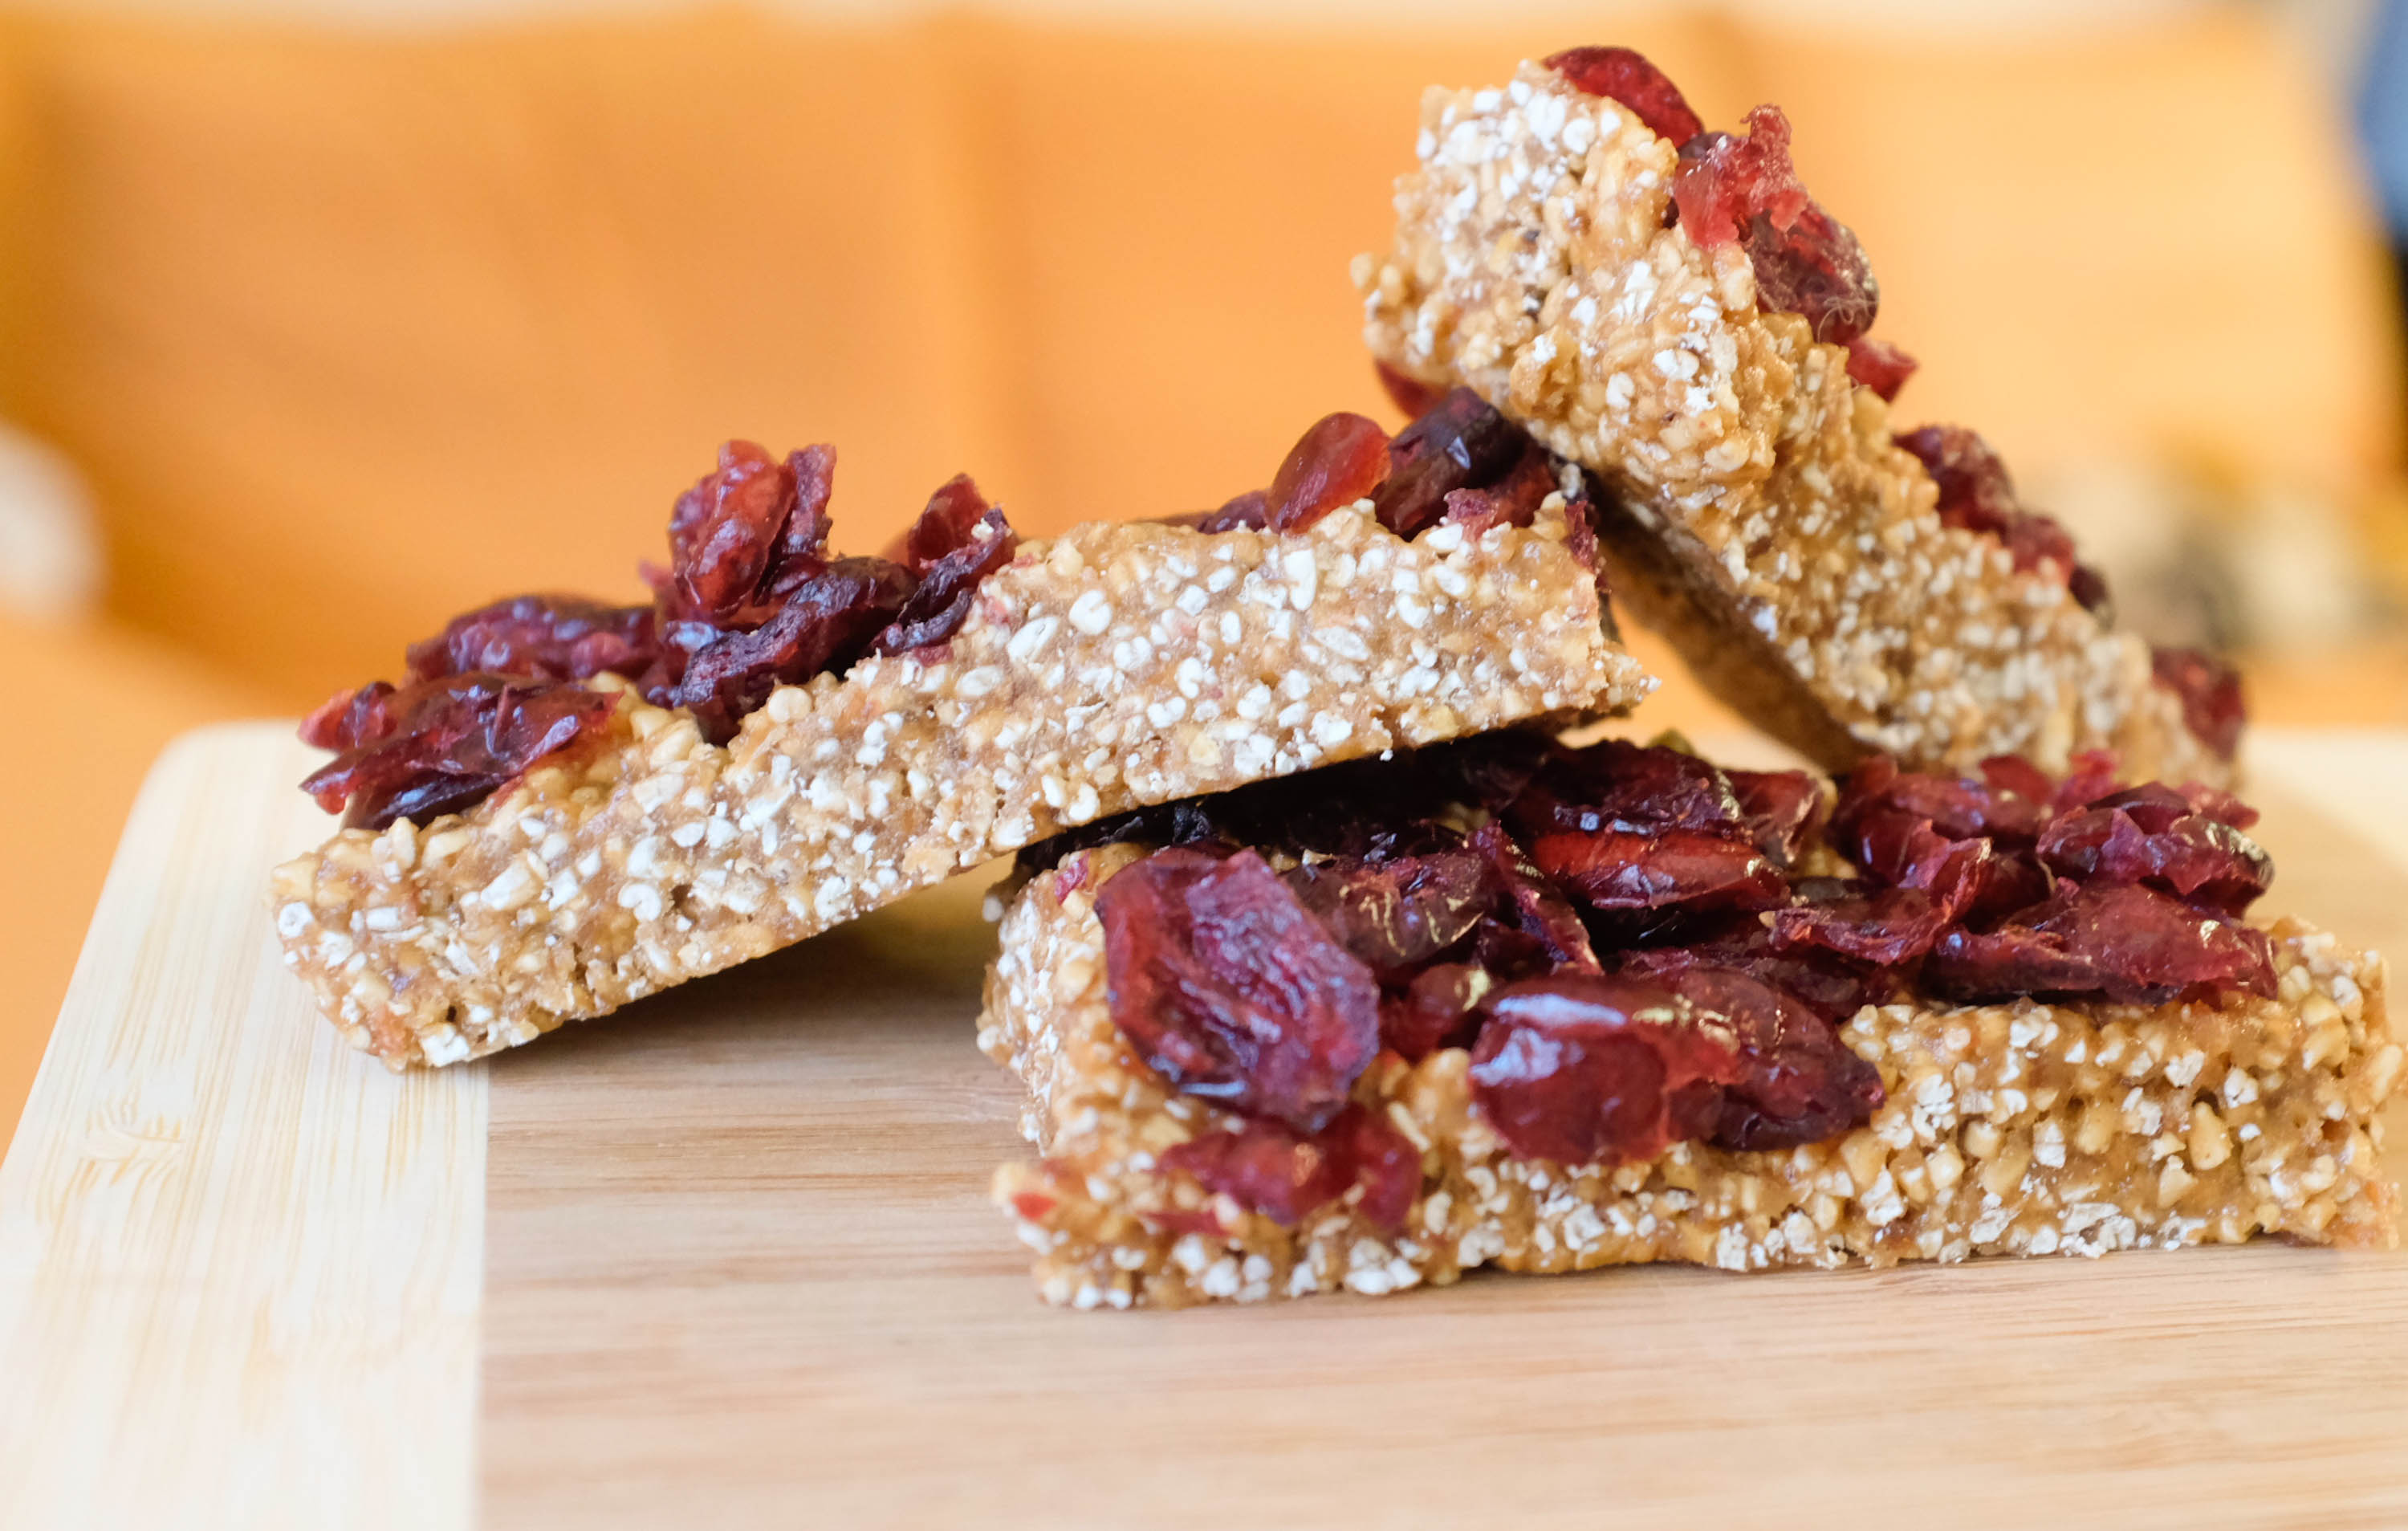 5 Ingredient Granola Bars with Dates, Almond Butter and Steel-Cut Oats